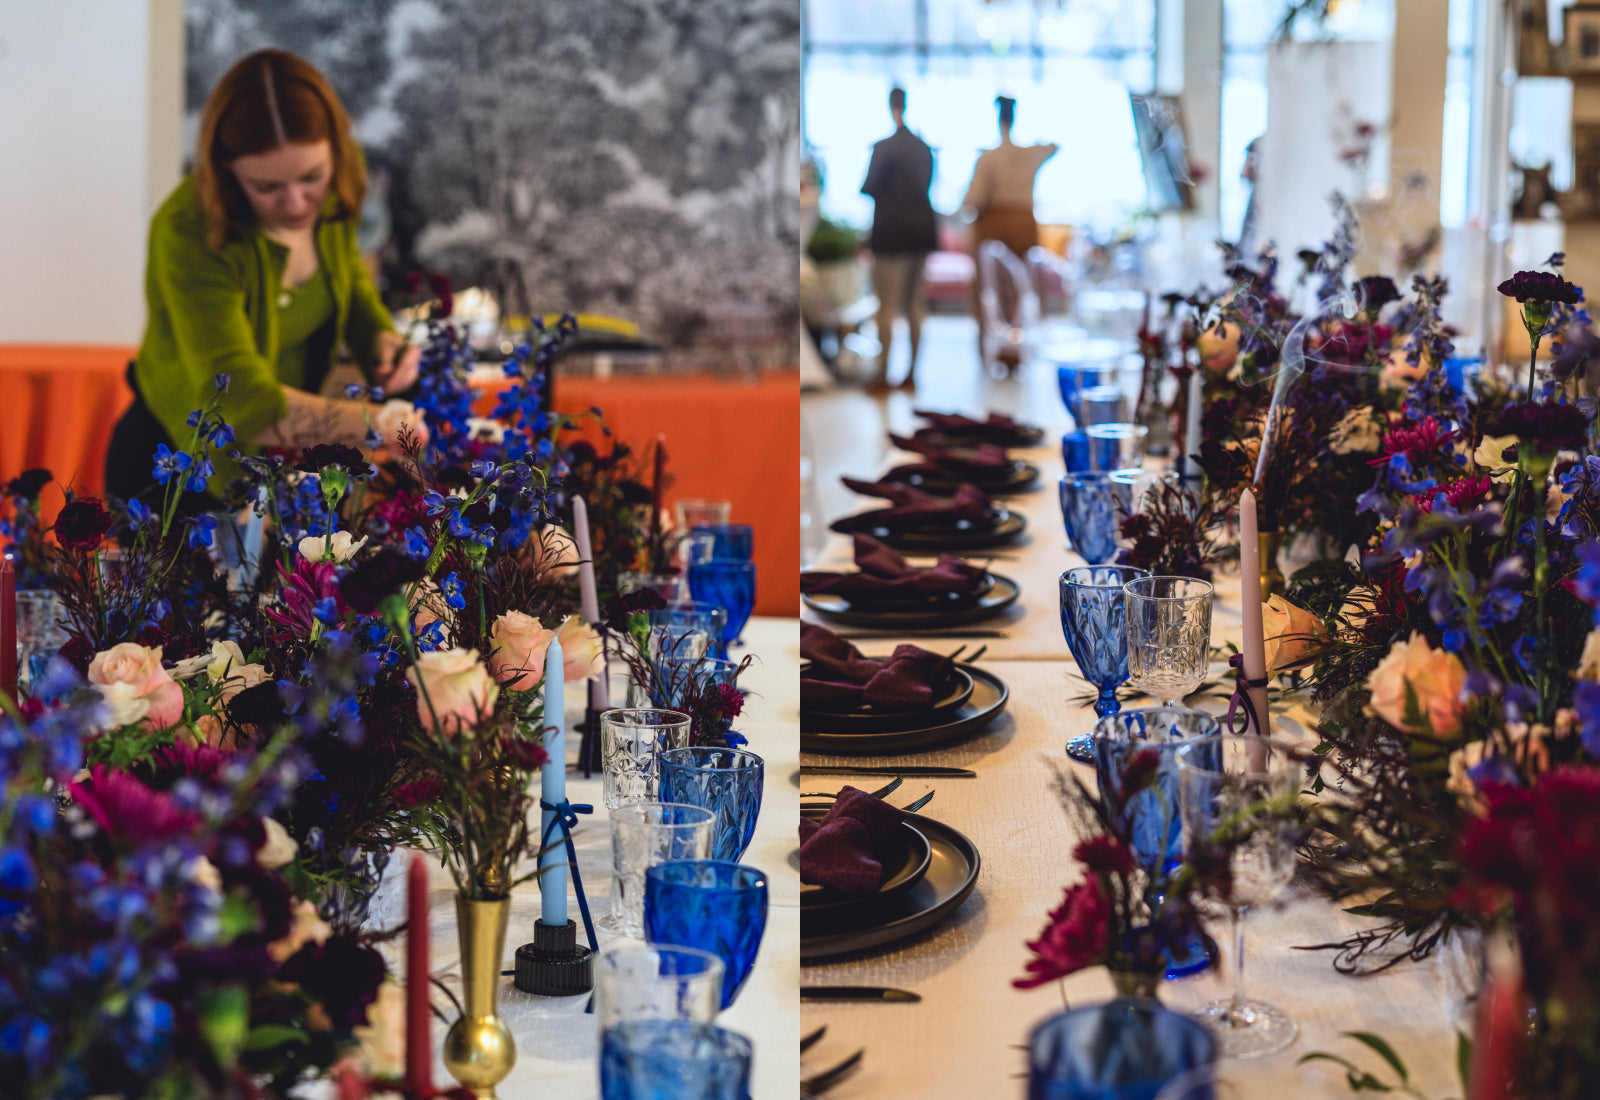 Two photos, both different shots of the same table set up with dark purple and blue flowers